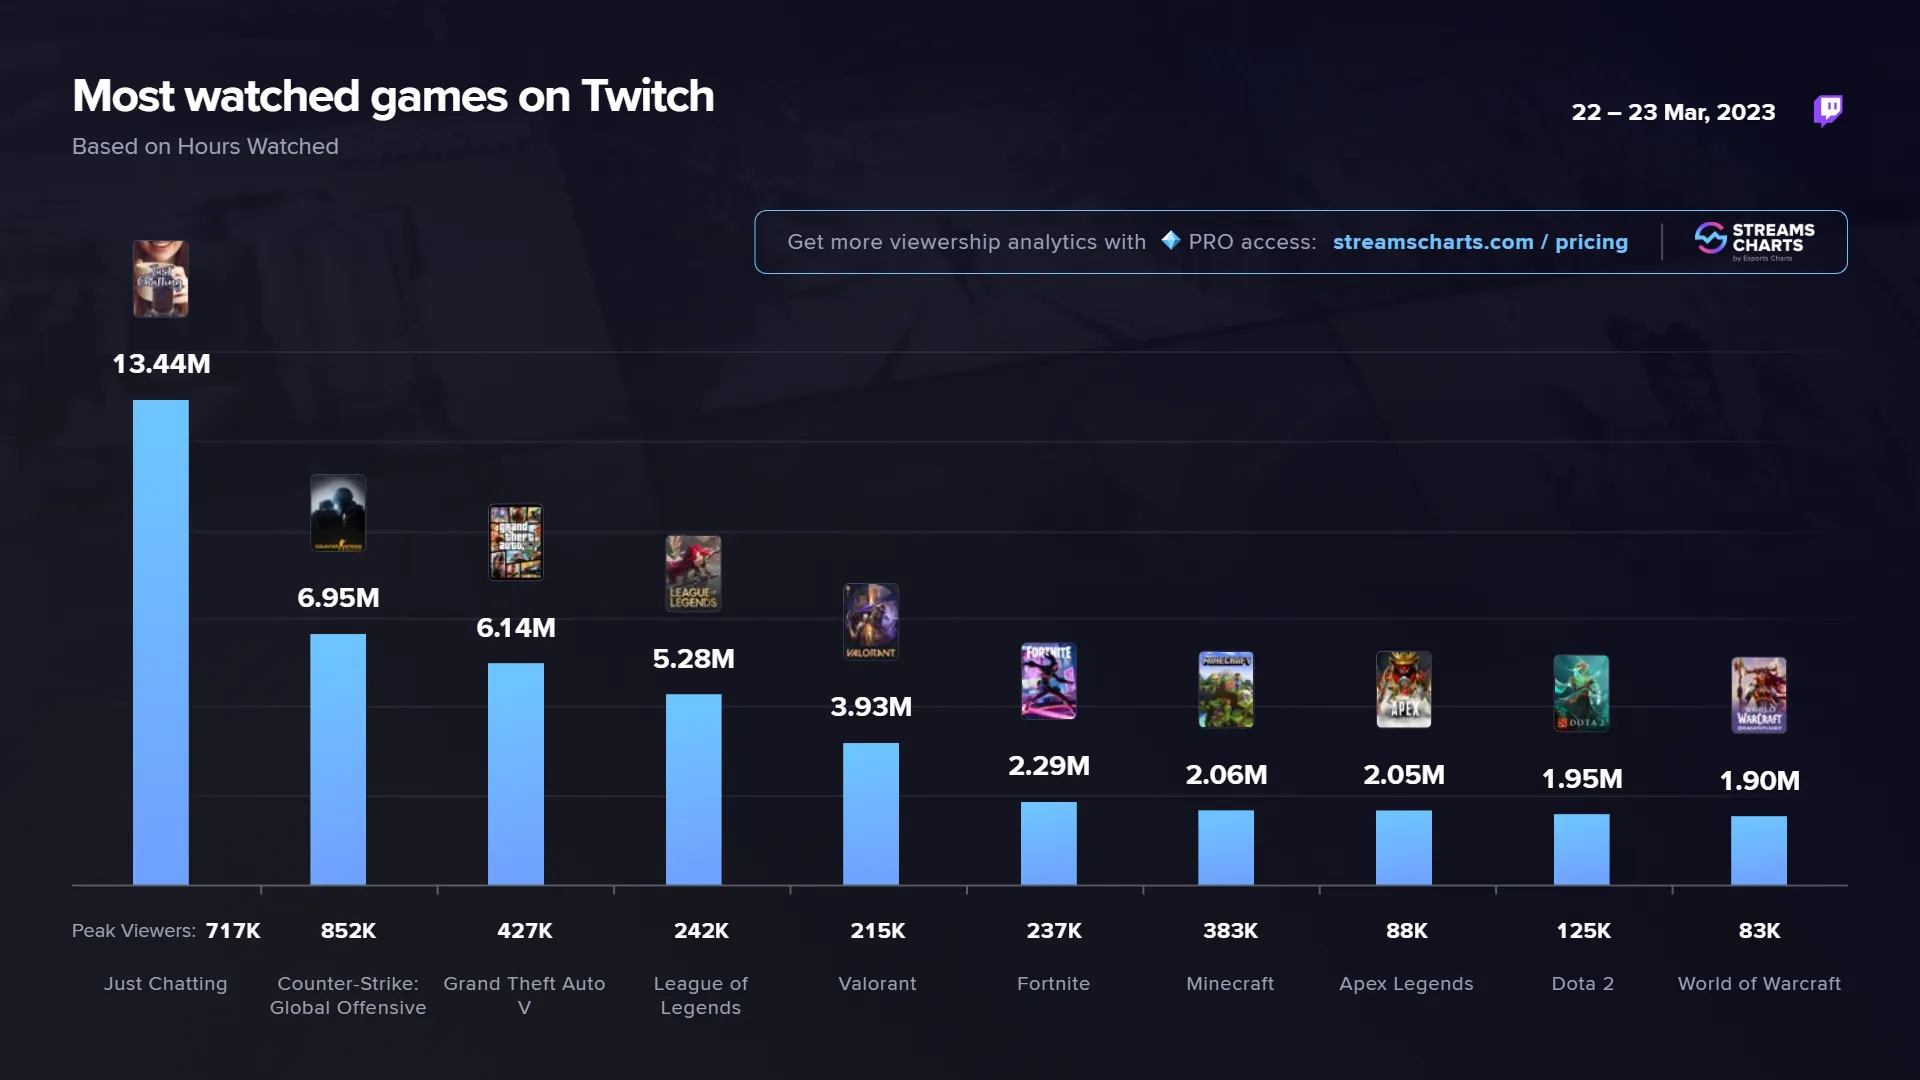 Top popular sections on Twitch